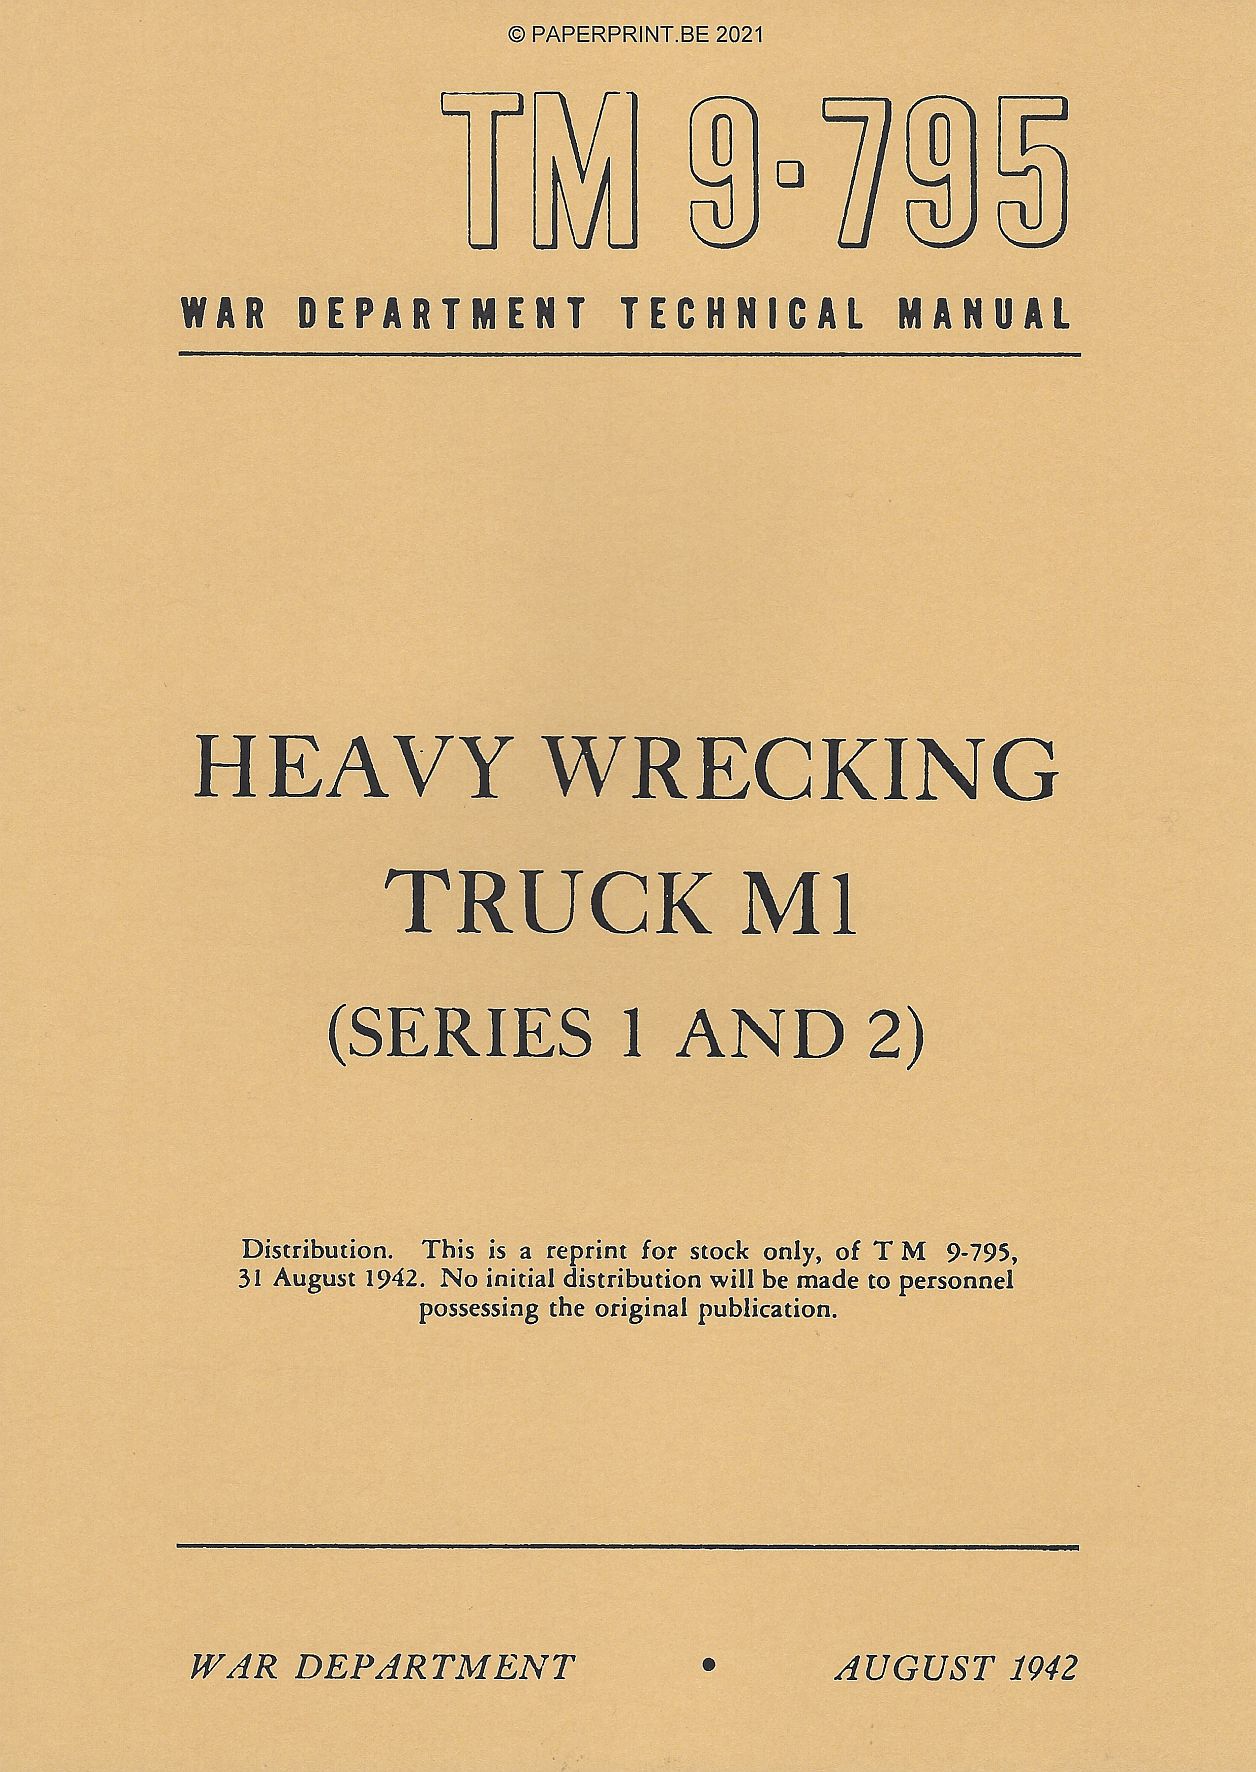 TM 9-795 US HEAVY WRECKING TRUCK M1 (SERIES 1 AND 2)